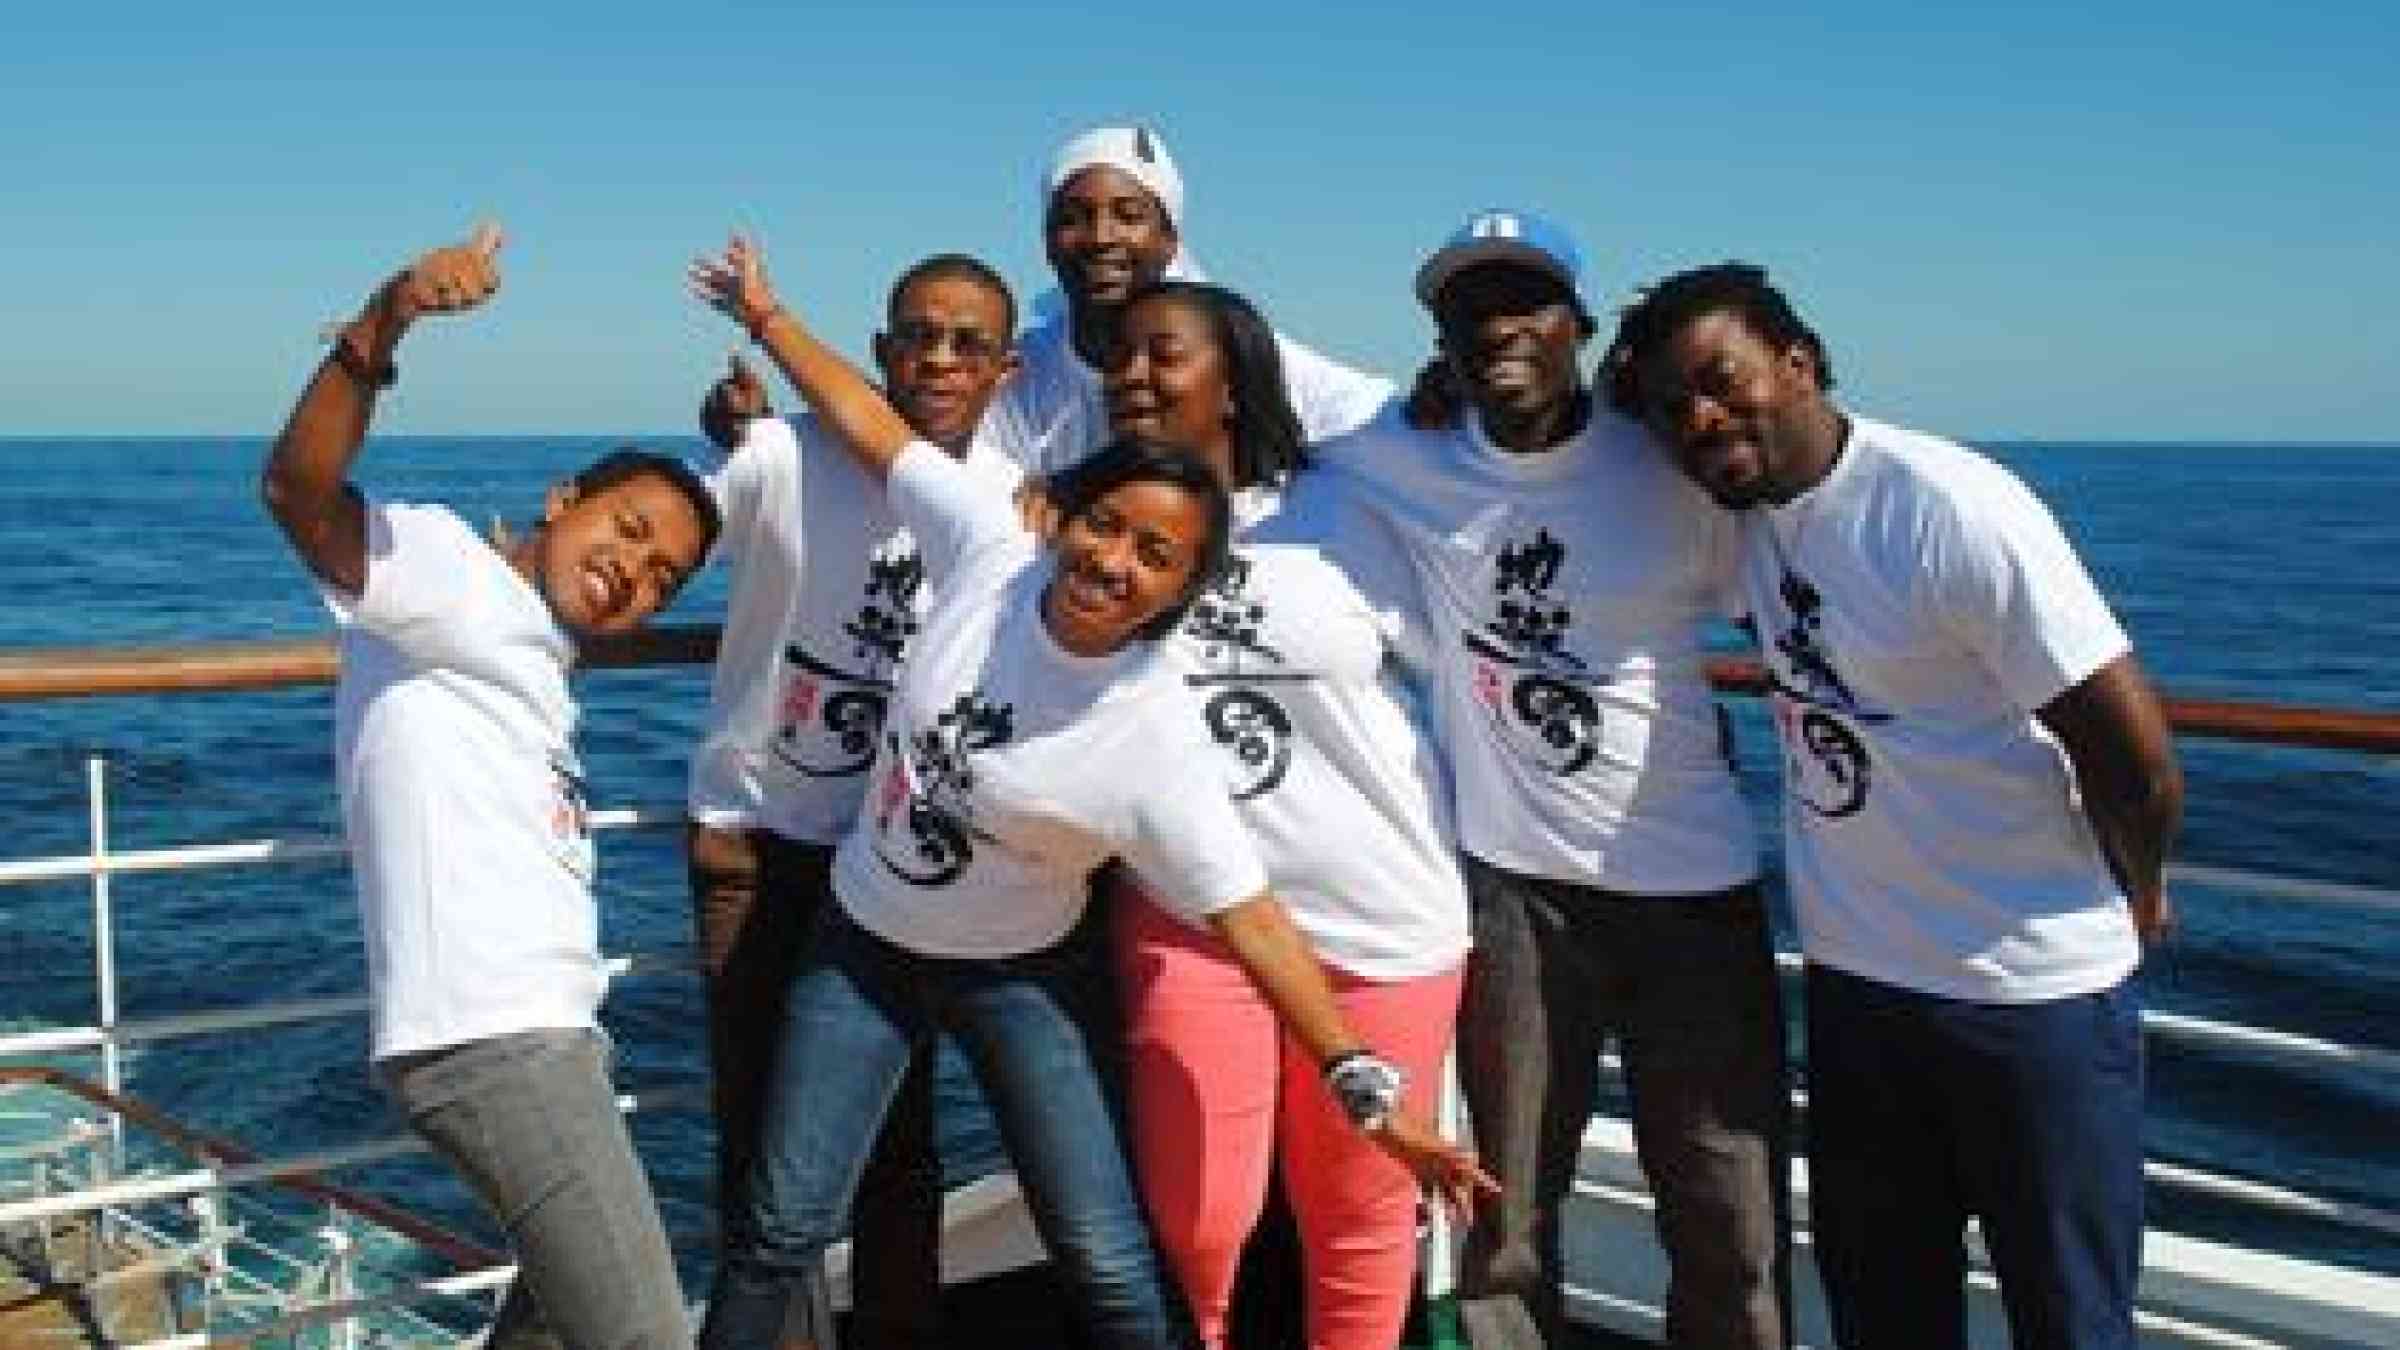 The seven African youth leaders enjoy a break after leading their disaster risk reduction sessions on board the Peace Boat.